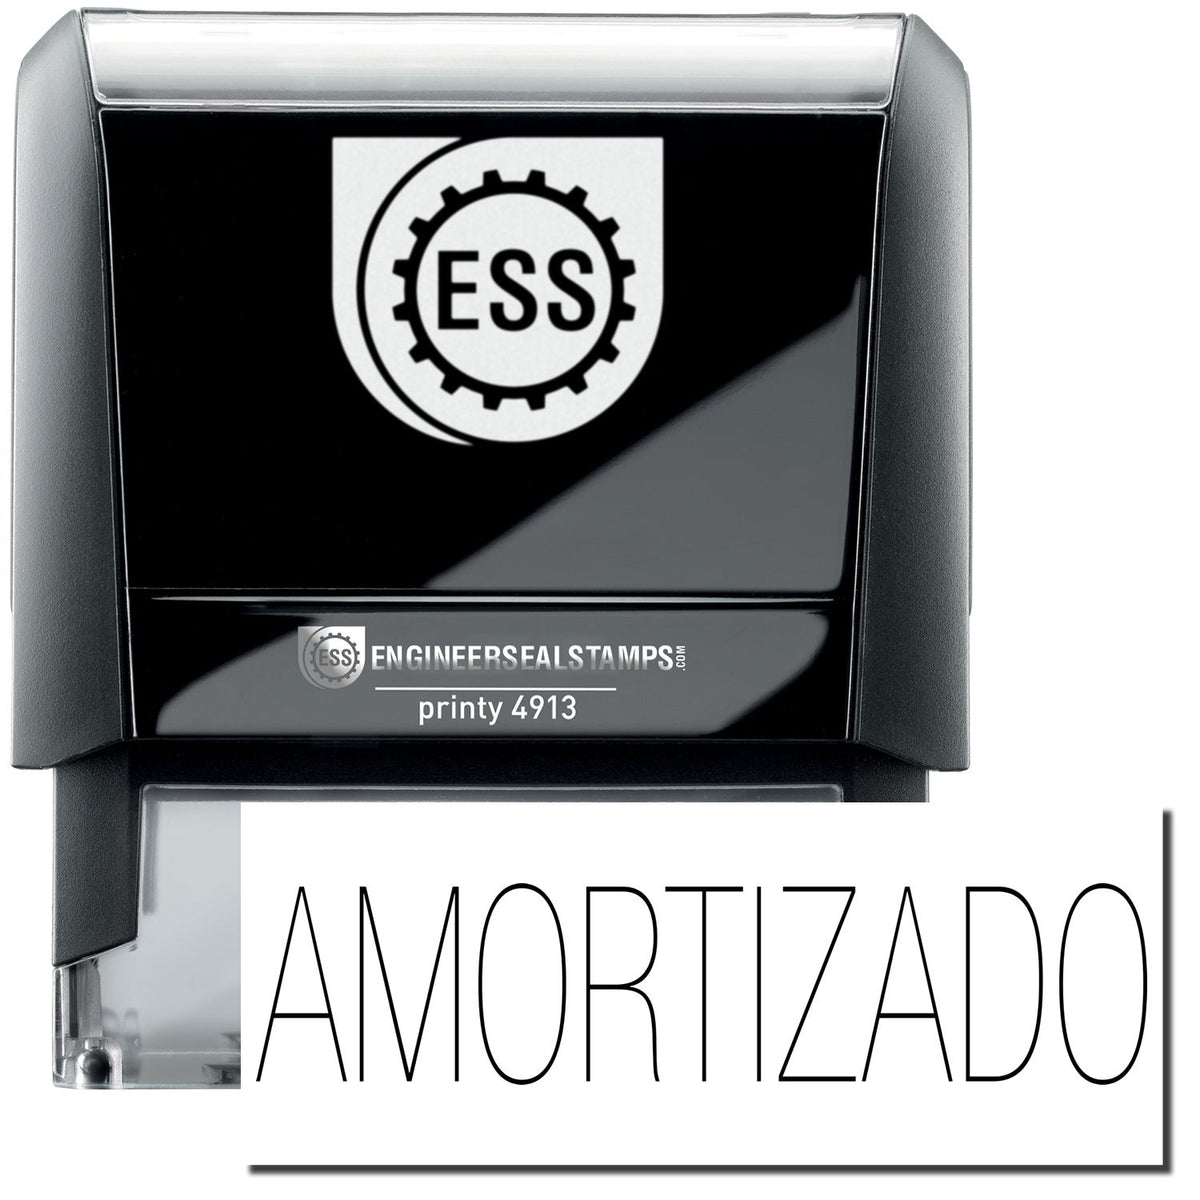 A self-inking stamp with a stamped image showing how the word &quot;AMORTIZADO&quot; in a large font is displayed by it after stamping.